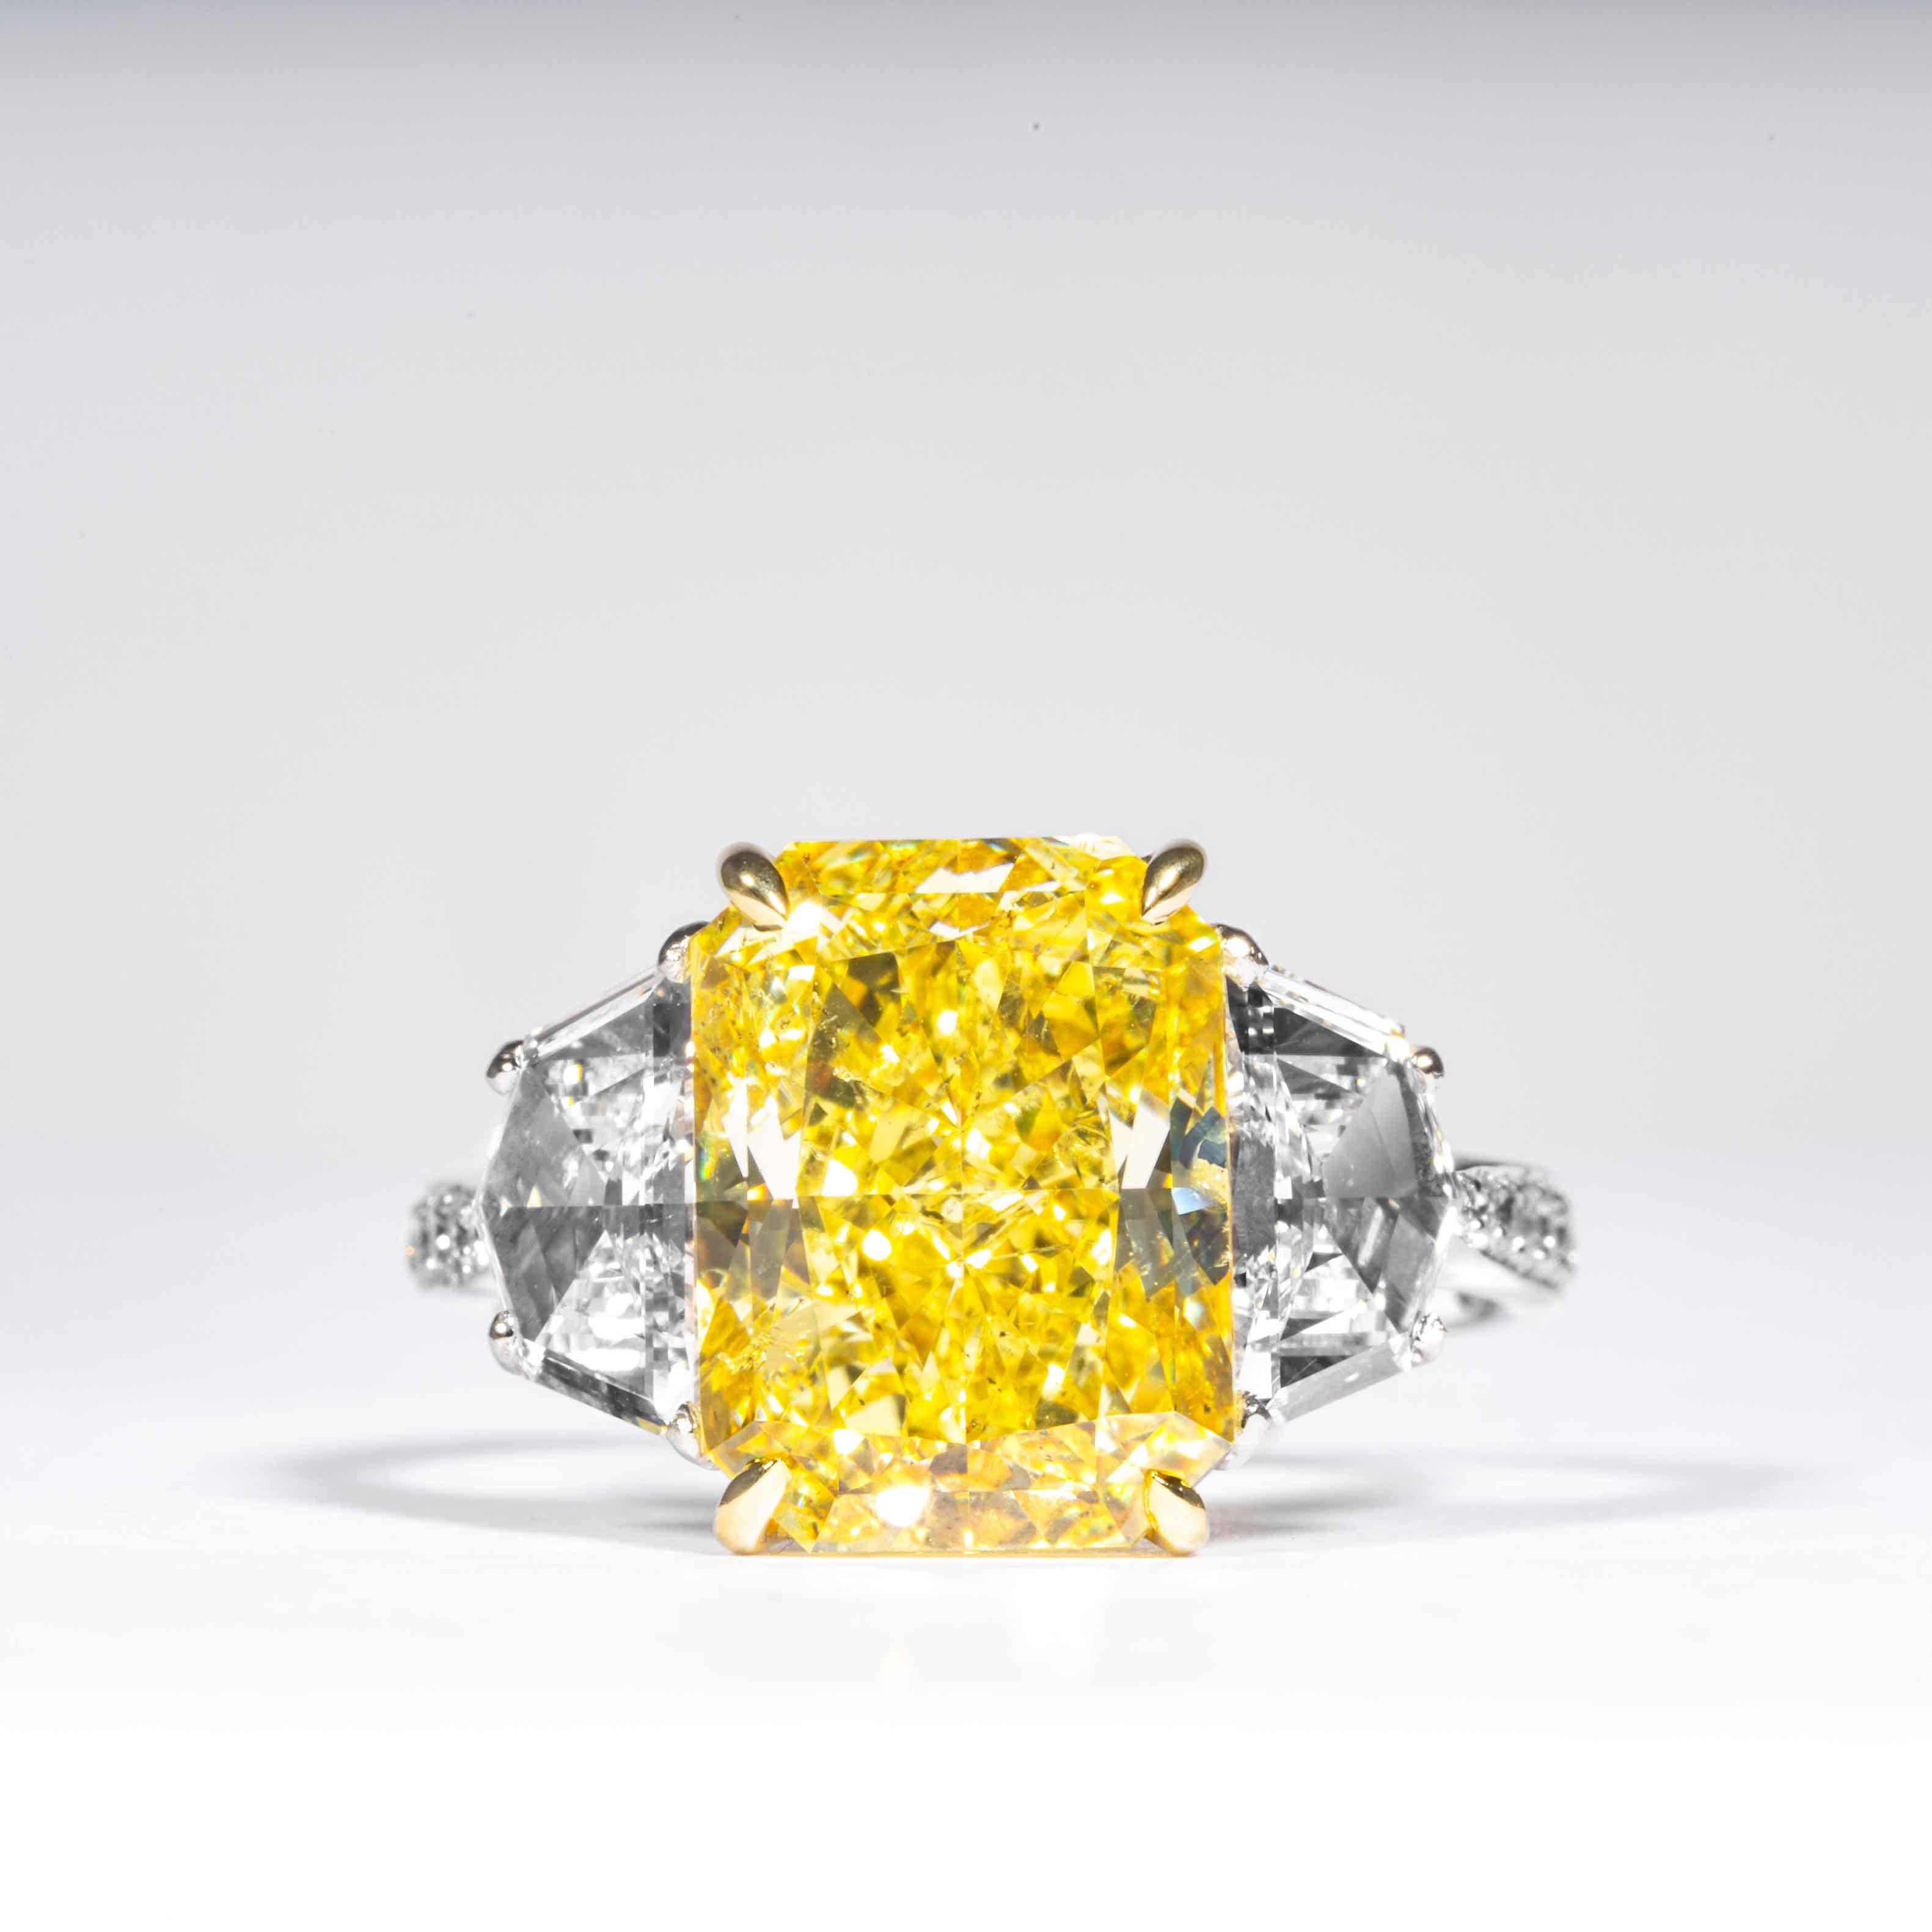 This fancy intense yellow radiant cut diamond is offered by Shreve, Crump & Low.  This fancy intense yellow radiant diamond measuring 11.13 x 8.34 x 6.01 mm is custom set in a handcrafted Shreve, Crump & Low platinum and 18 karat yellow gold 3 stone